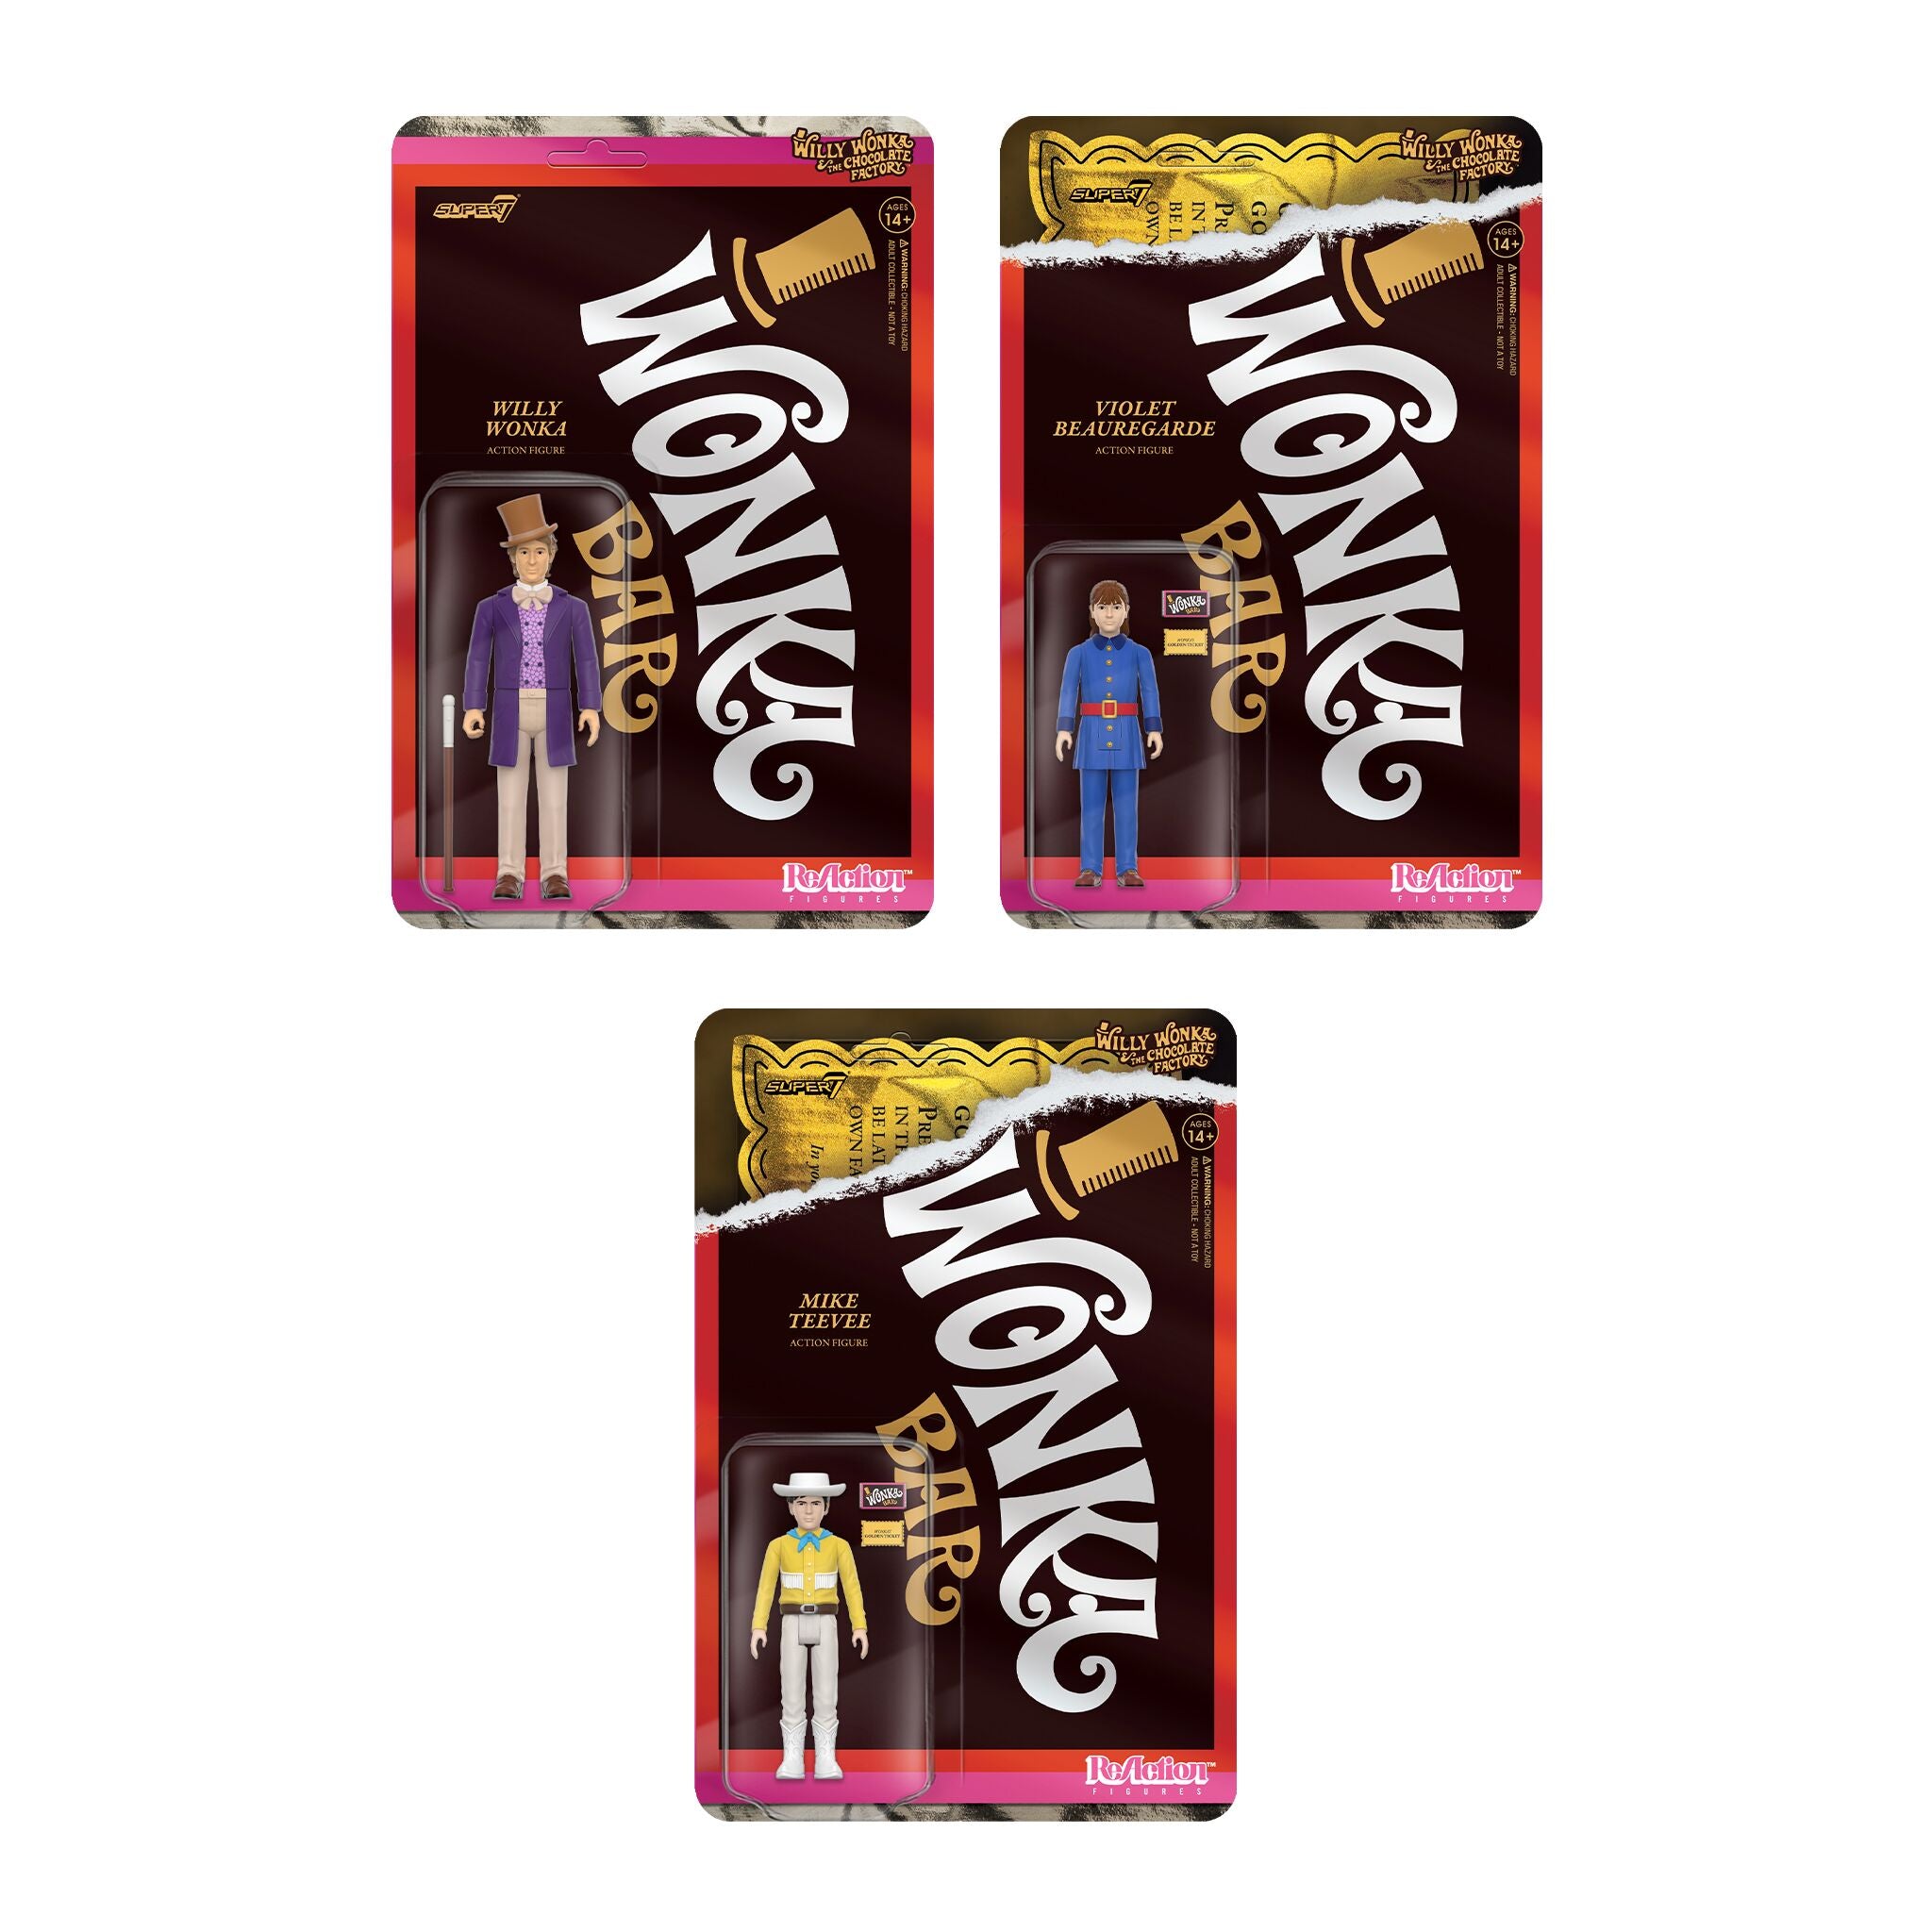 Willy Wonka & the Chocolate Factory ReAction Figures Wave 01 - Willy Wonka, Violet Beauregarde & Mike Teevee